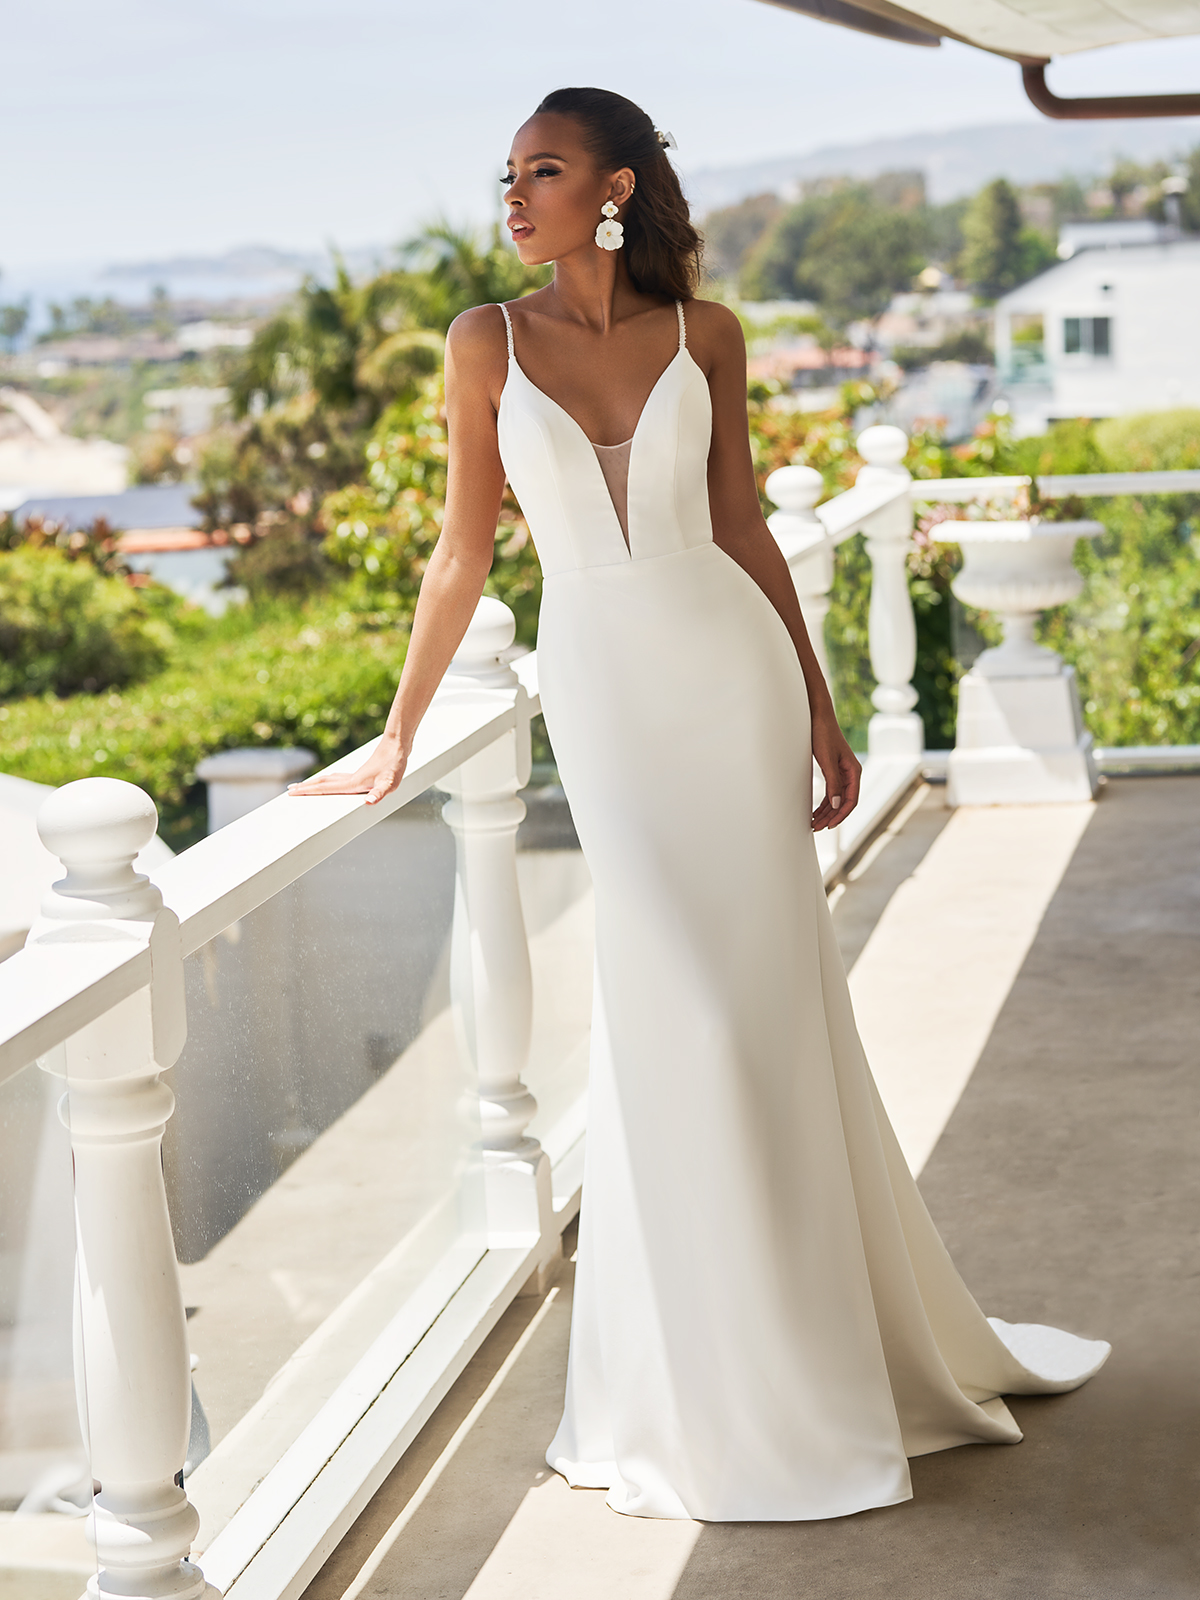 Bride leaning up against a balcony railing in a sleek crepe wedding dress